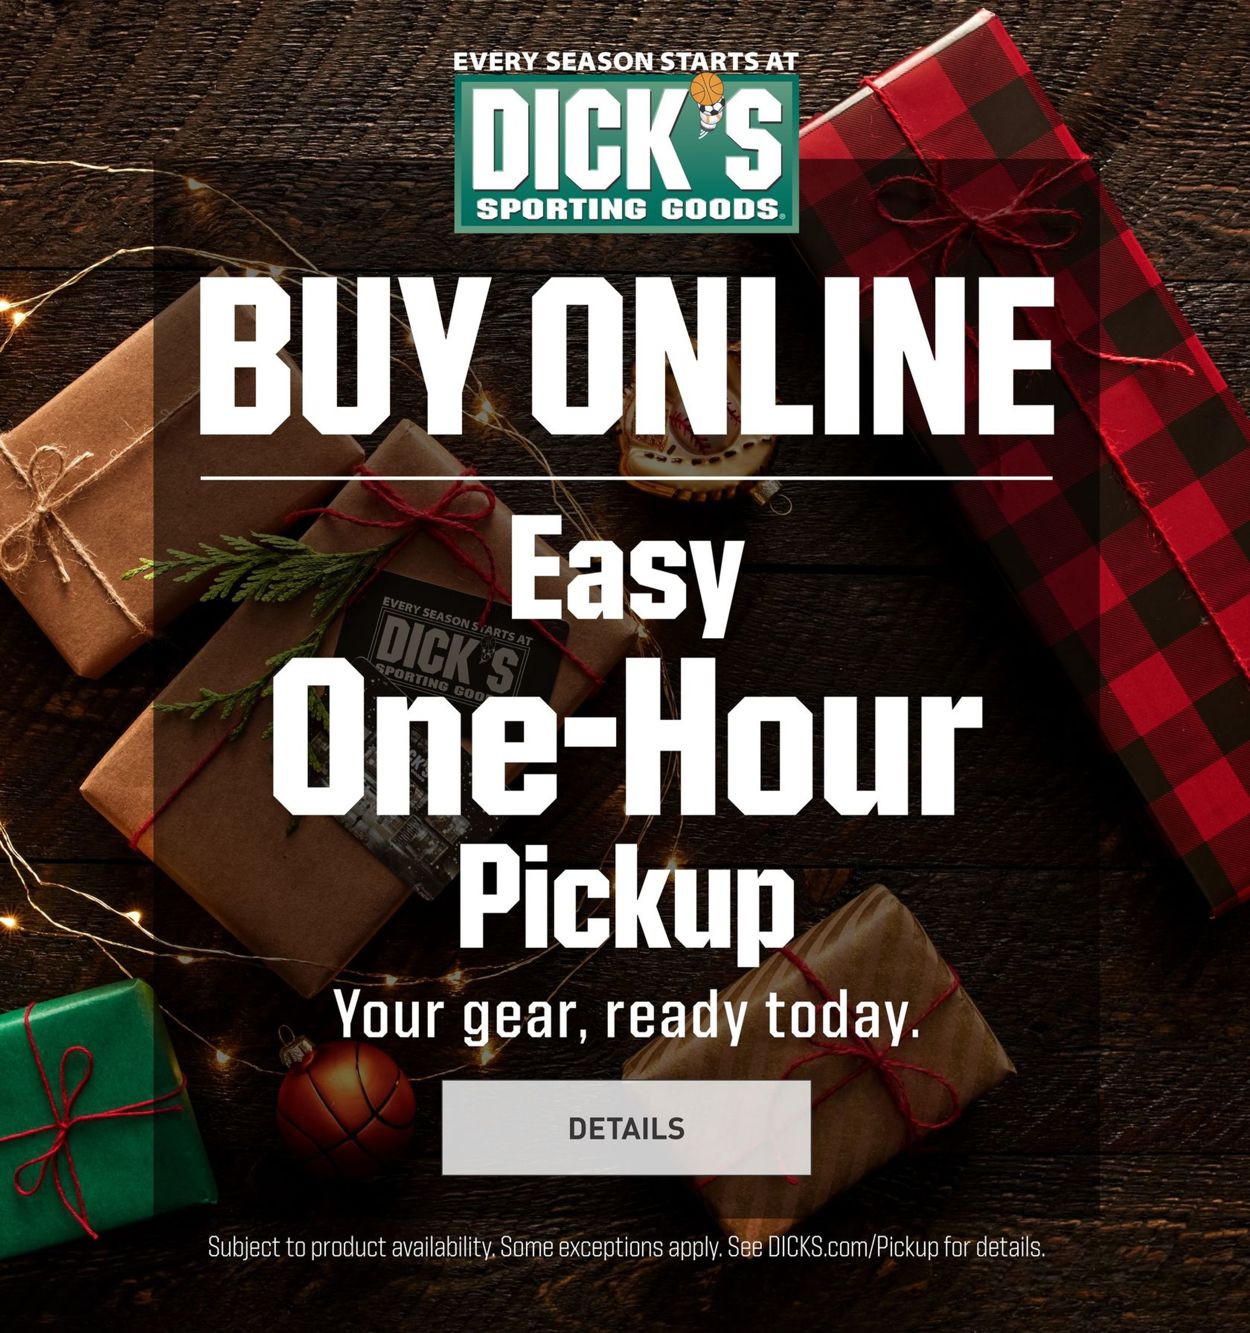 Catalogue Dick's - Black Friday Ad Ad 2019 from 11/24/2019